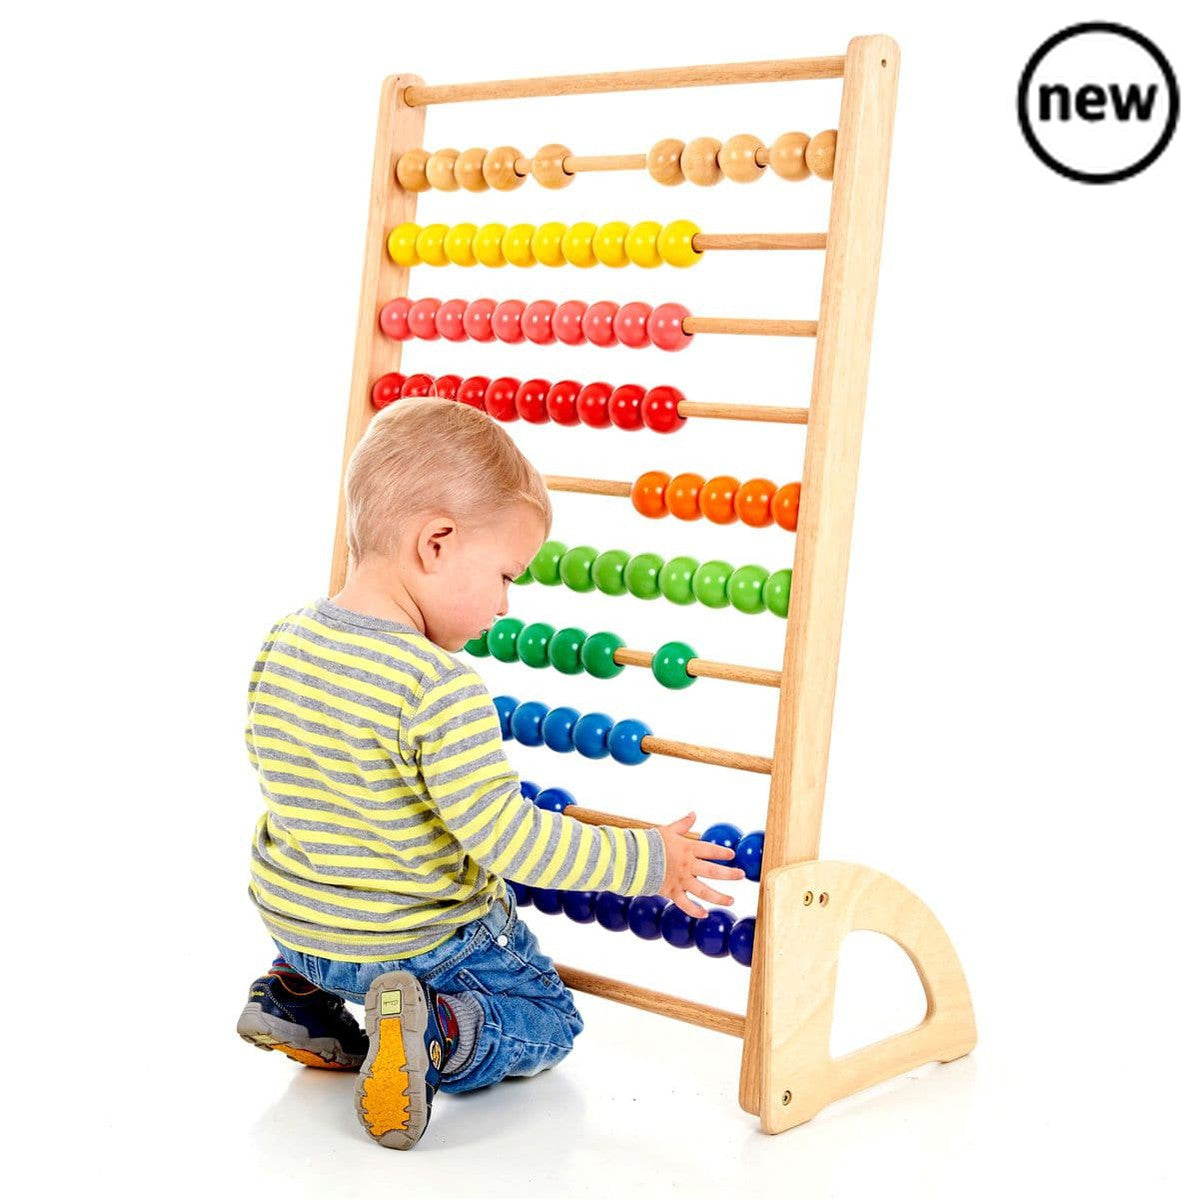 Giant Abacus, Our colourful Giant Wooden Abacus is a fantastic traditional wooden toy that is perfect for use at home, nursery or even the classroom. Encourages maths skills, patterning and colour recognition. With its bright beads and sturdy wooden frame, this traditional wooden abacus toy is highly educational and a playroom essential. There are ten rows with ten beads on each - so let's start adding! Made from high-quality, responsibly sourced materials. Conforms to current European safety standards. Req